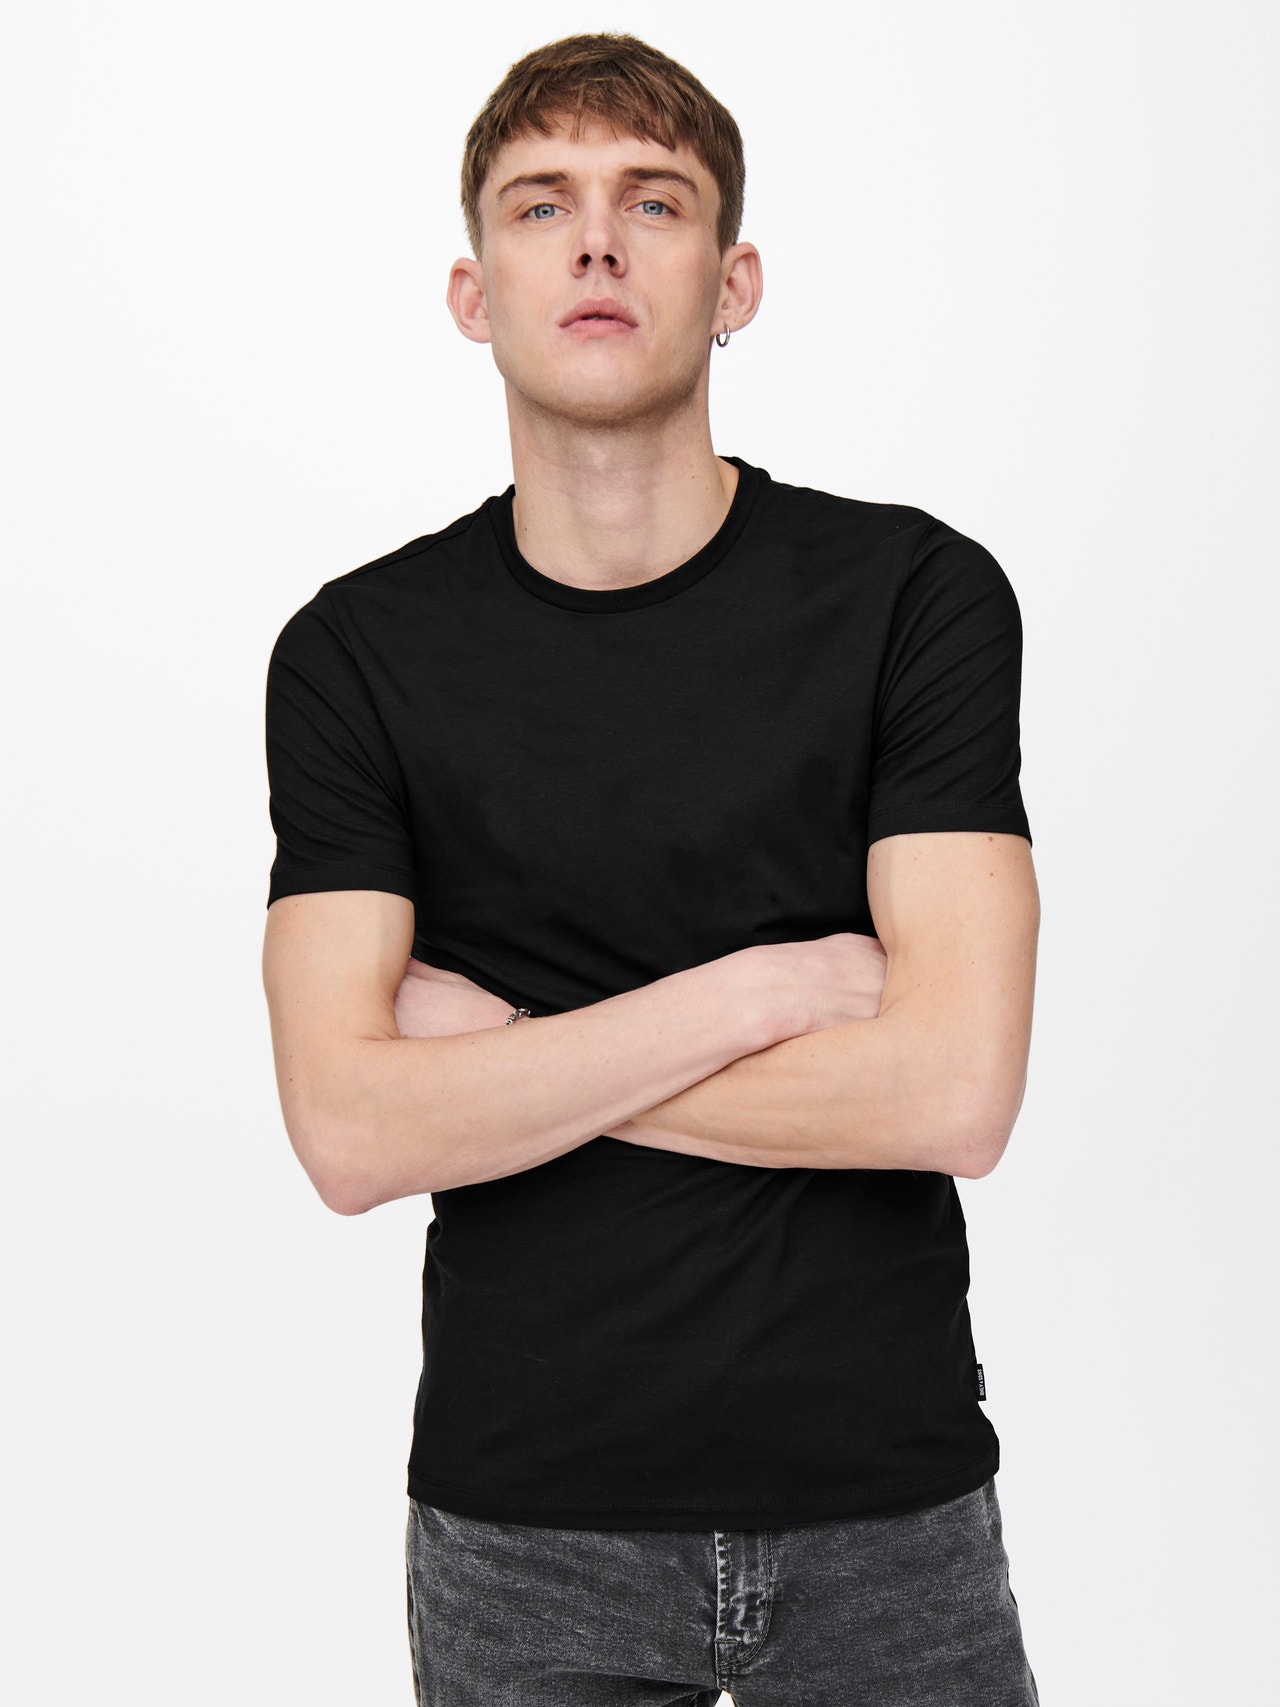 ONLY & SONS 2-pack o-neck t-shirt -Black - 22021181